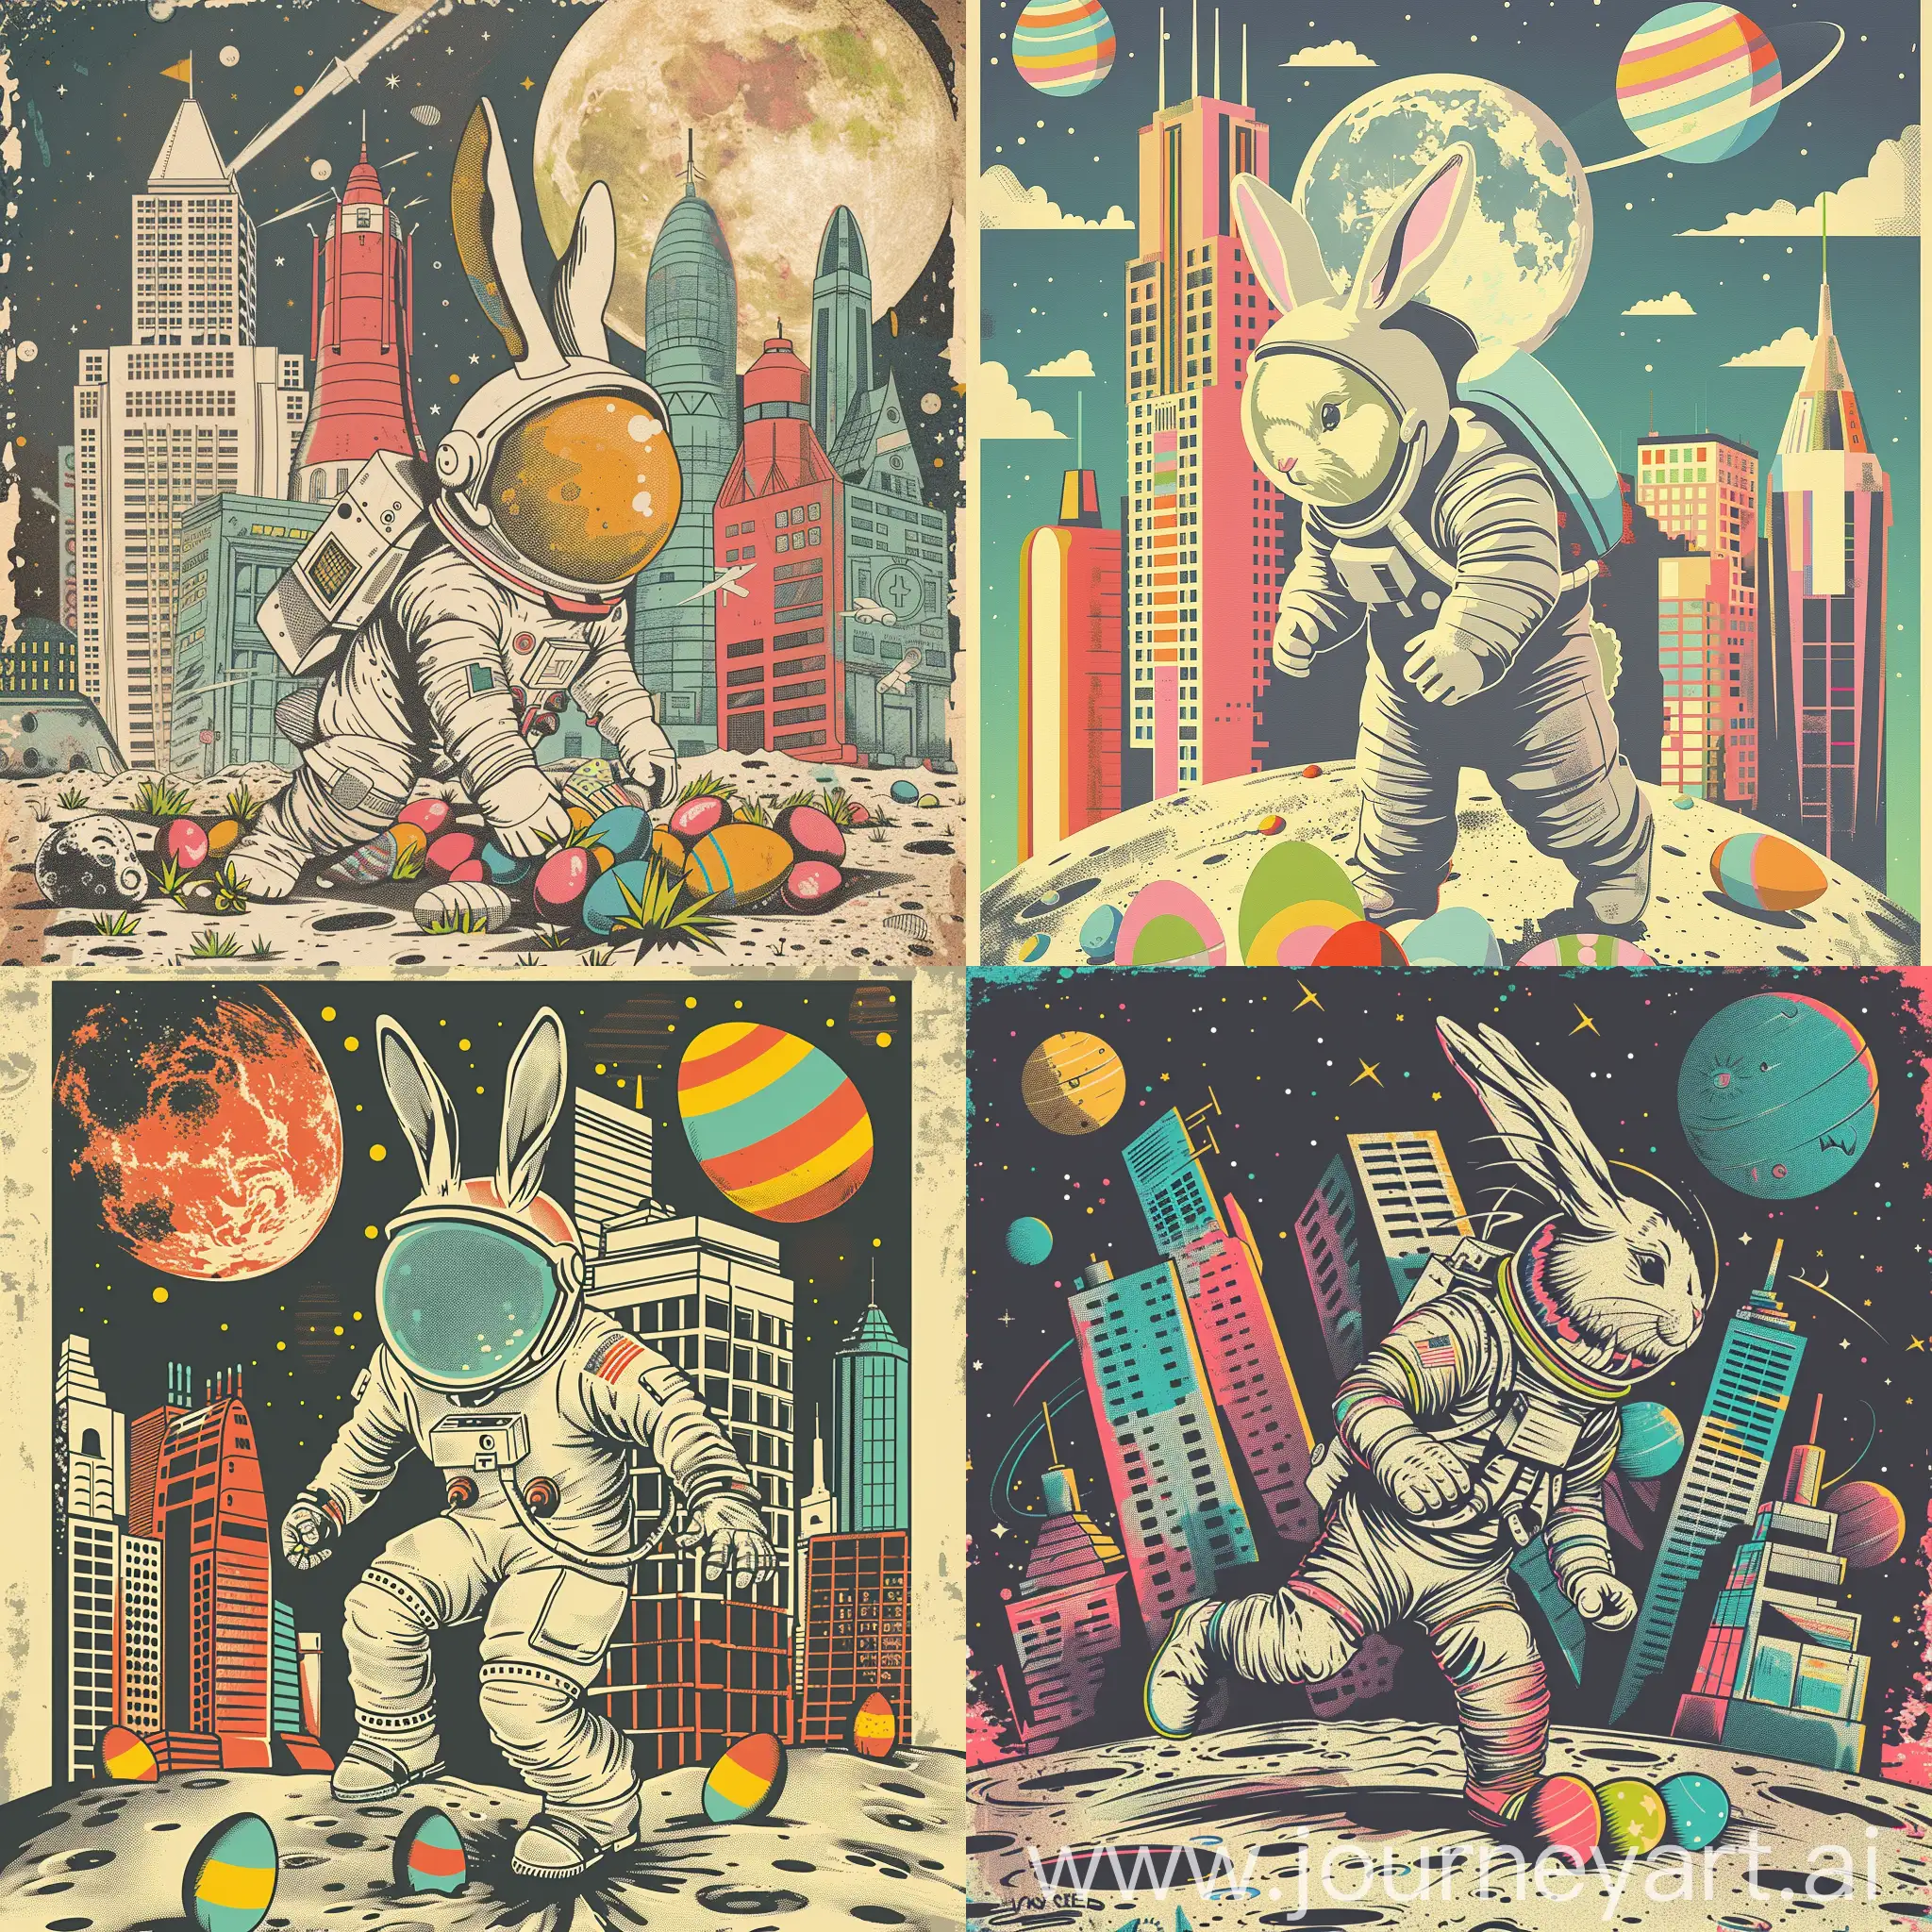 Space-Easter-Bunny-Hunting-Easter-Eggs-on-the-Moon-Amid-Retro-Buildings